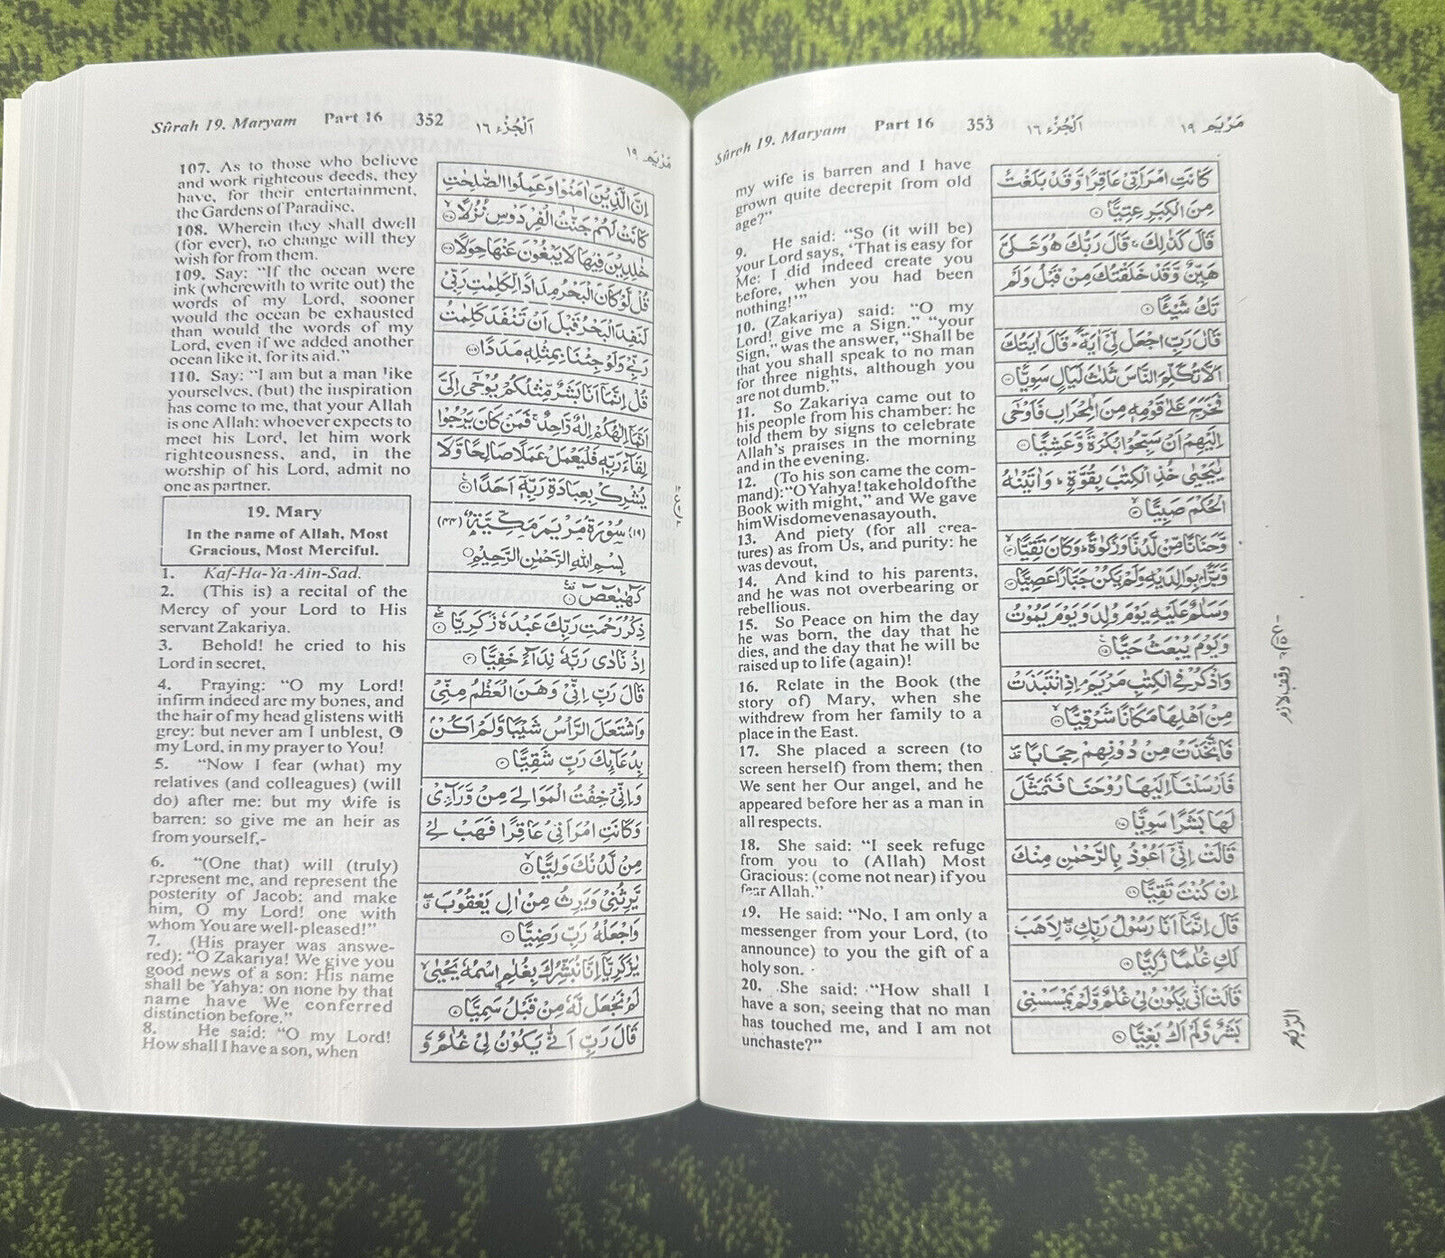 The Holy Quran (English Translation with Original Arabic Text)